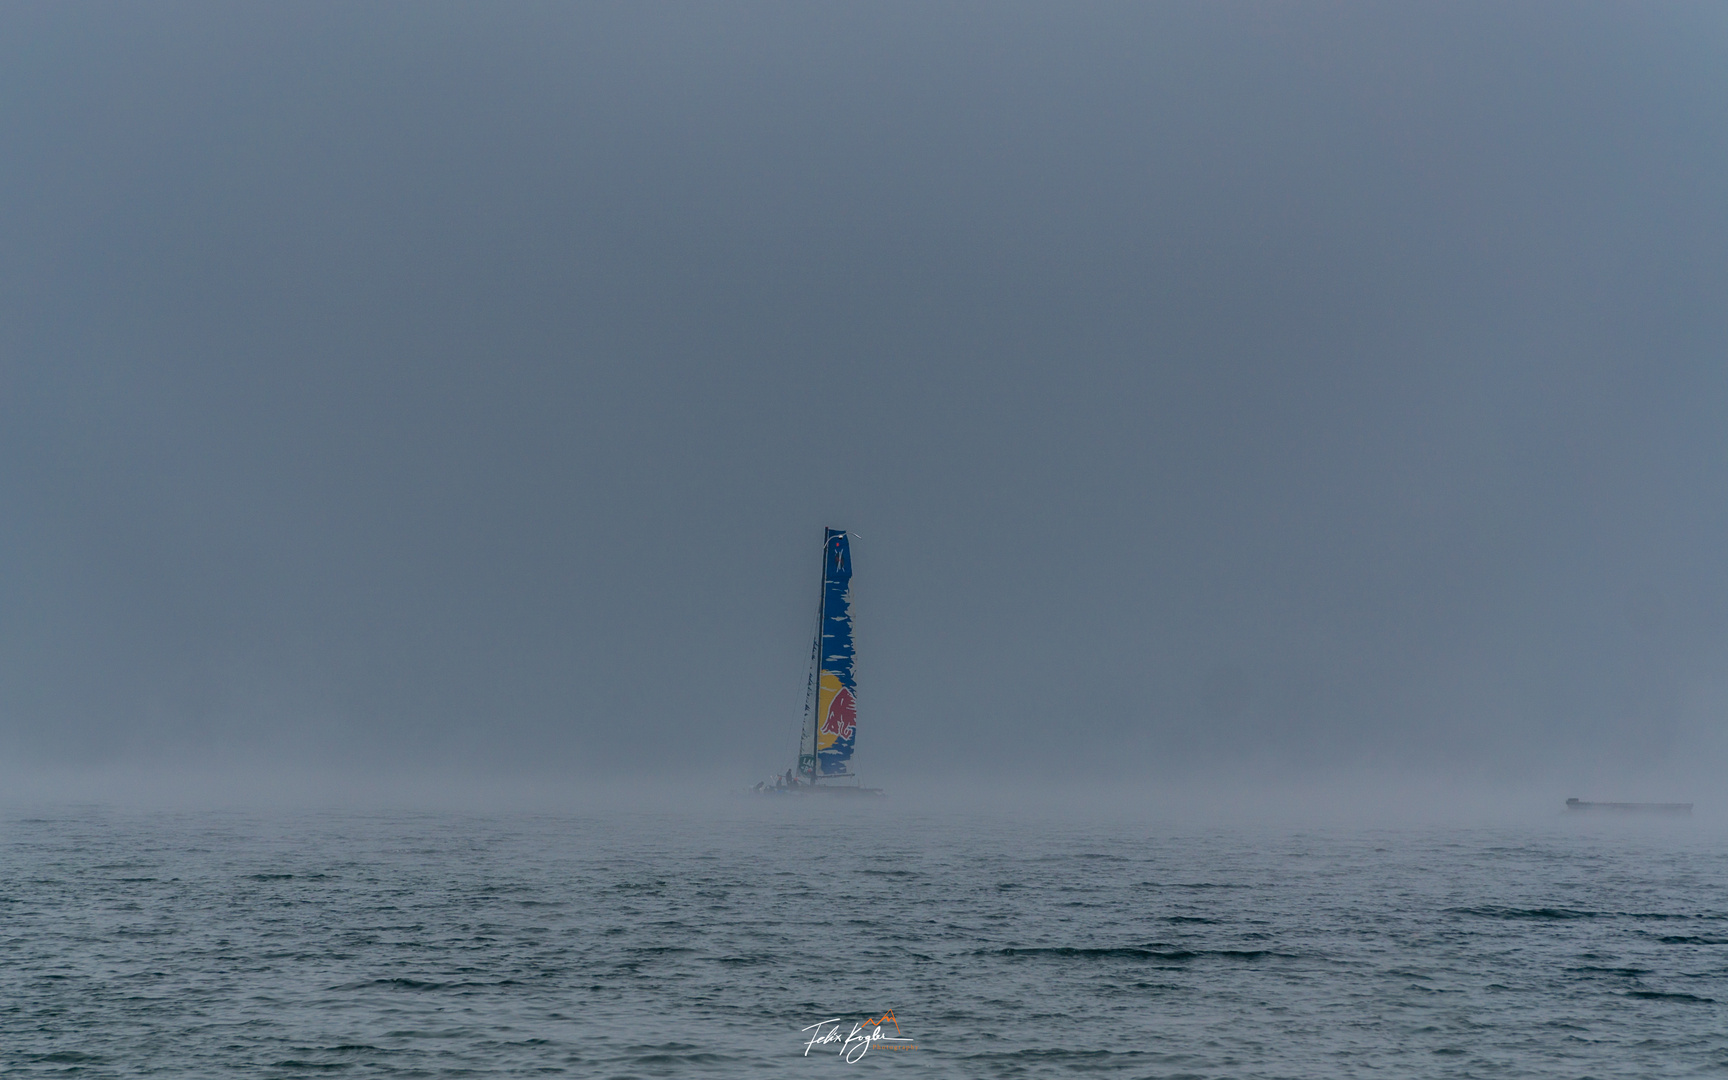 "Training for the Red Bull Youth America's Cup"